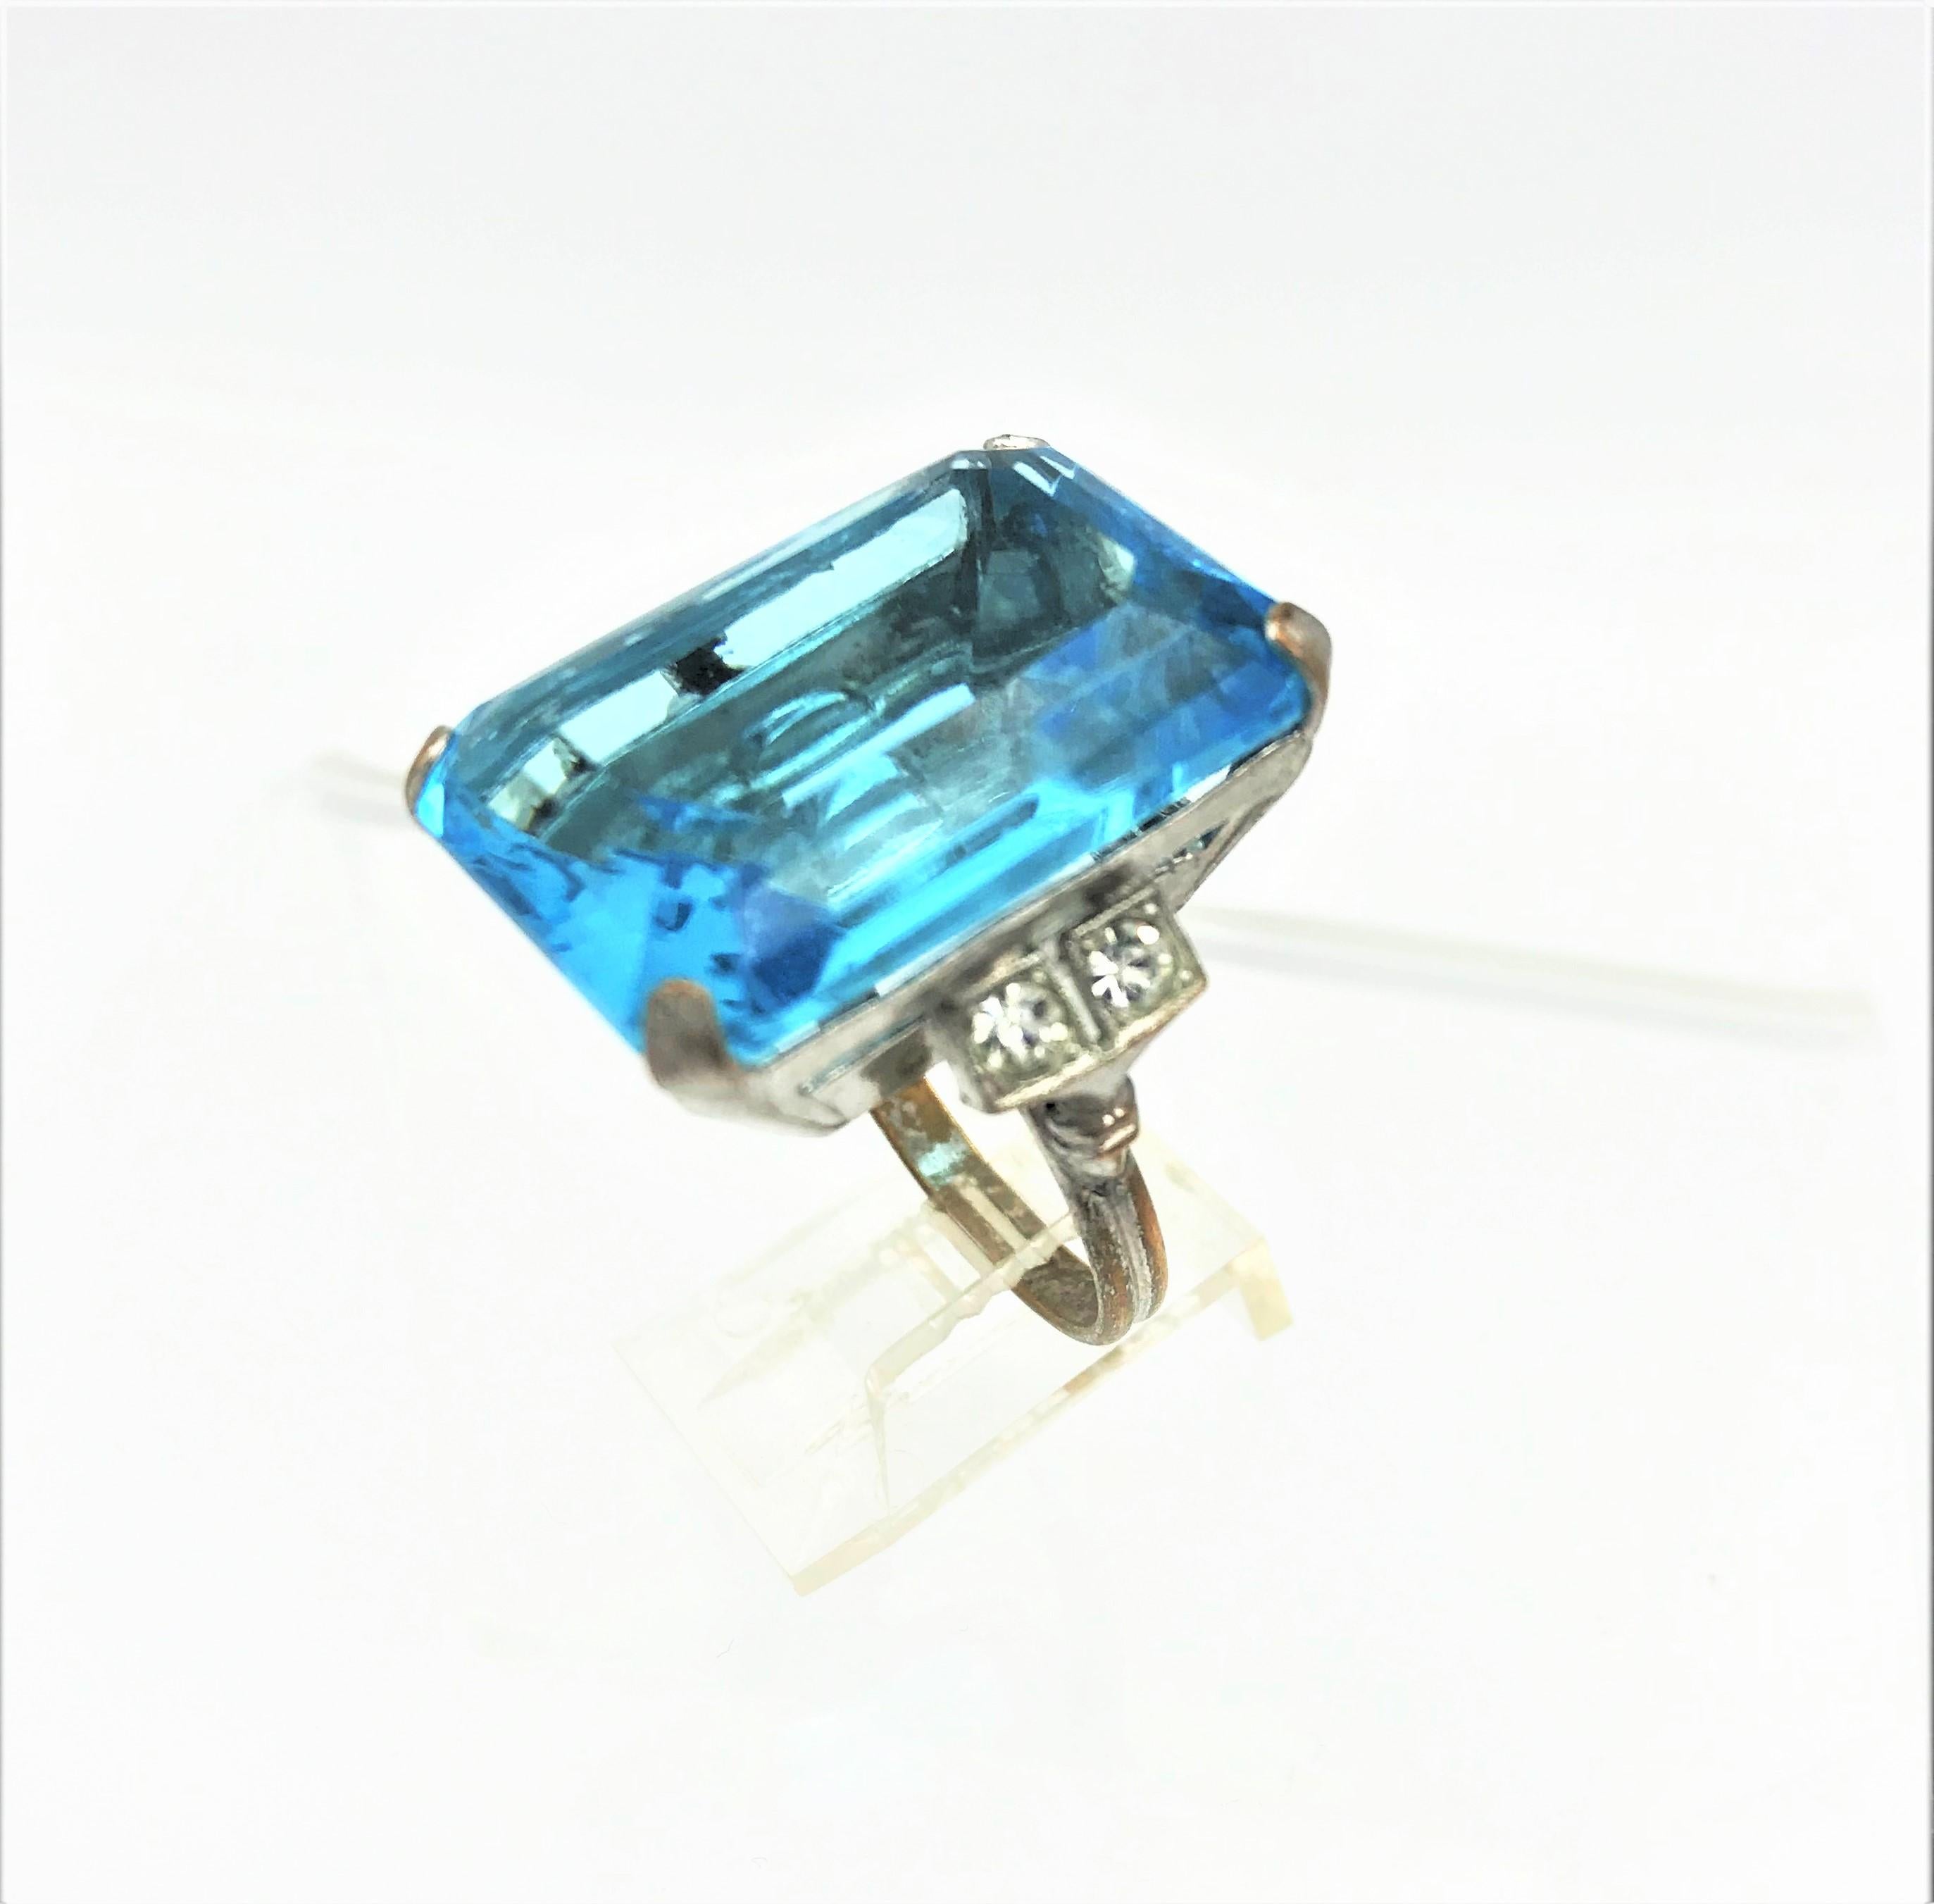 A very attractive cocktail ring with a large cut aqua rhinestone stone, 2 small rhinestones on each side. Size 58

Size of the aqua stone 2,5 cm/1